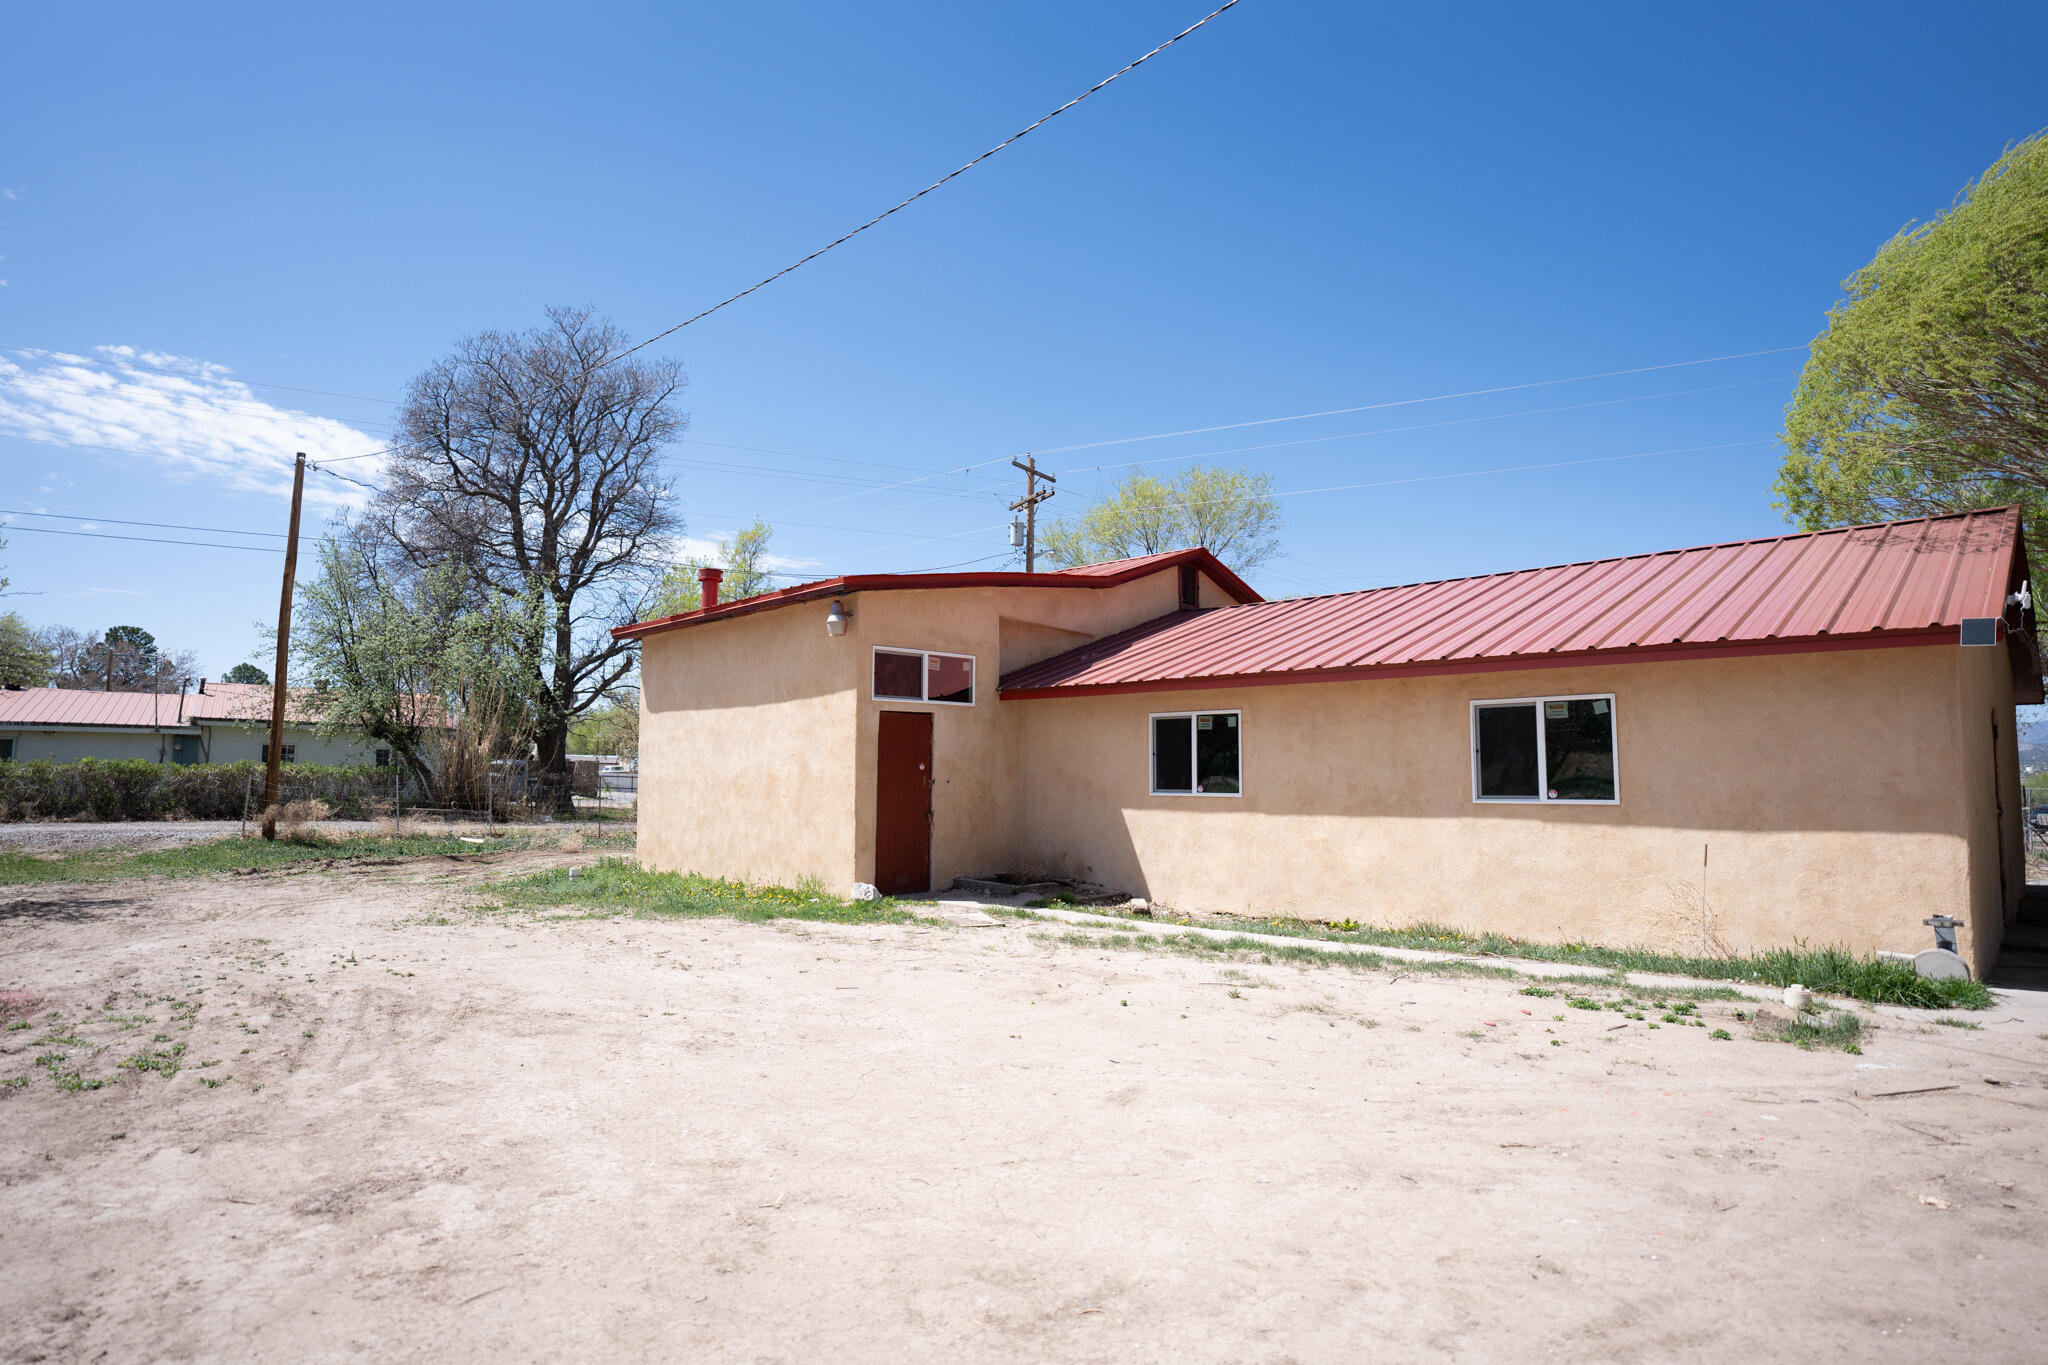 1715 N Mccurdy Road, Espanola, New Mexico 87532, 3 Bedrooms Bedrooms, ,2 BathroomsBathrooms,Residential,For Sale,1715 N Mccurdy Road,1061269